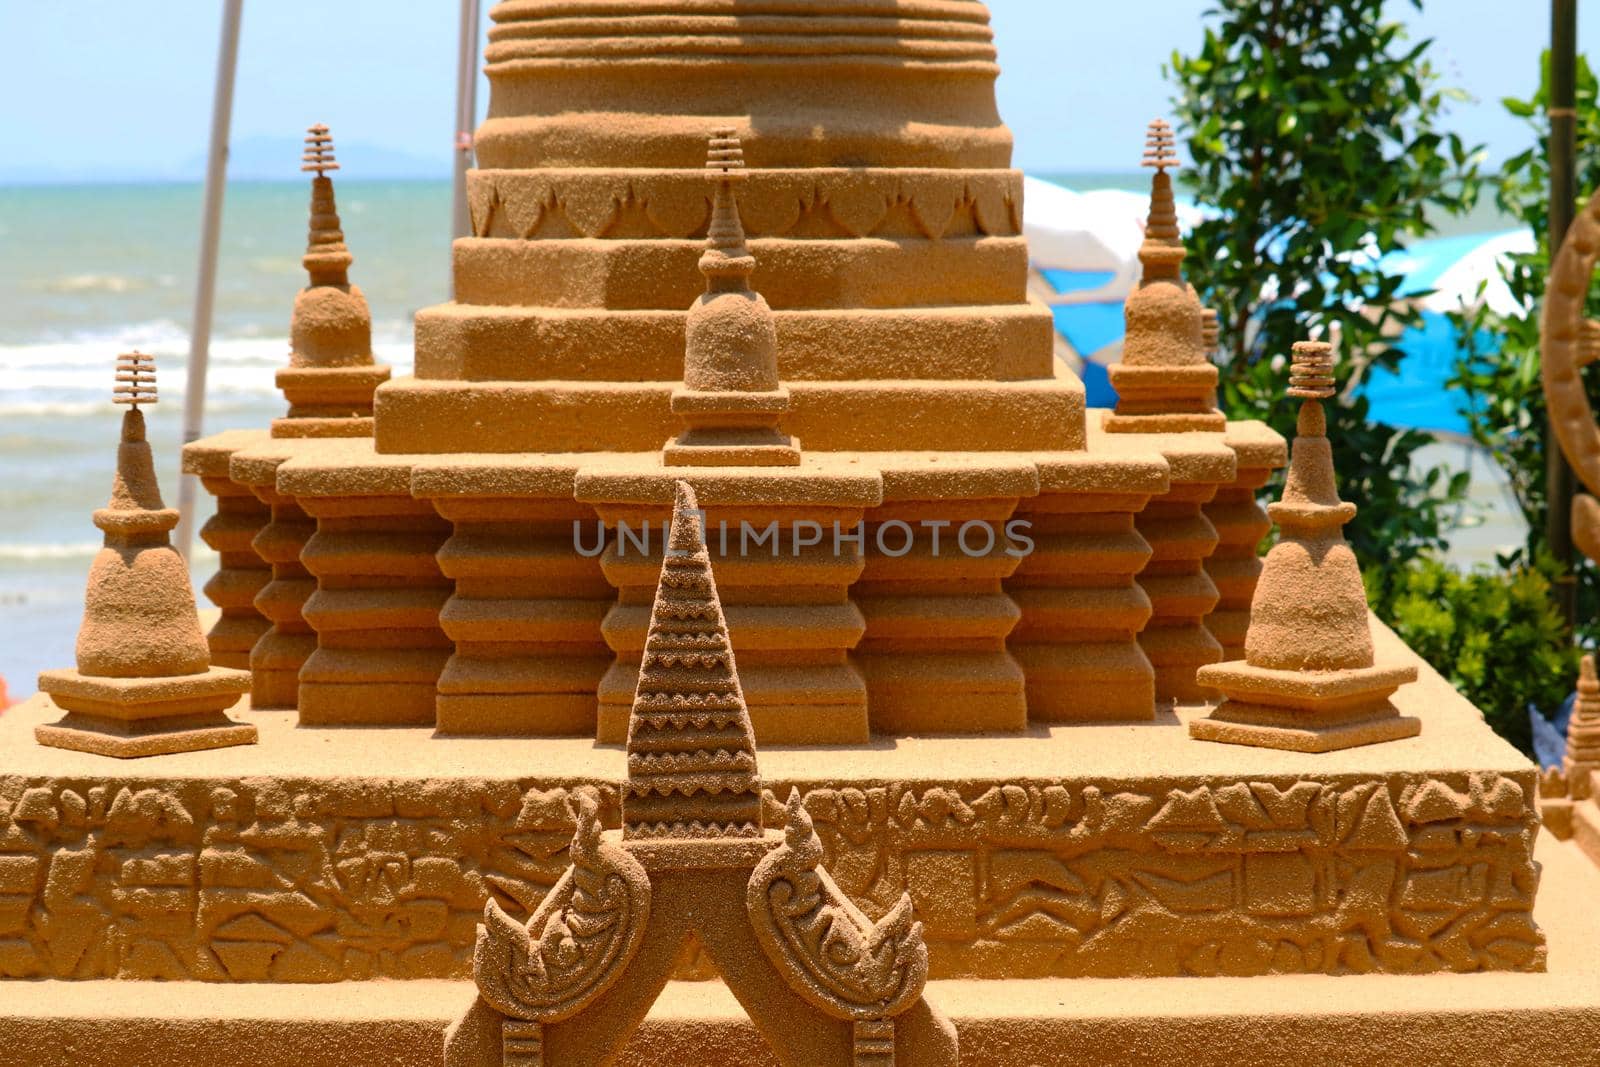 detail of sand pagoda was carefully built, and beautifully decorated in Songkran festival by Darkfox